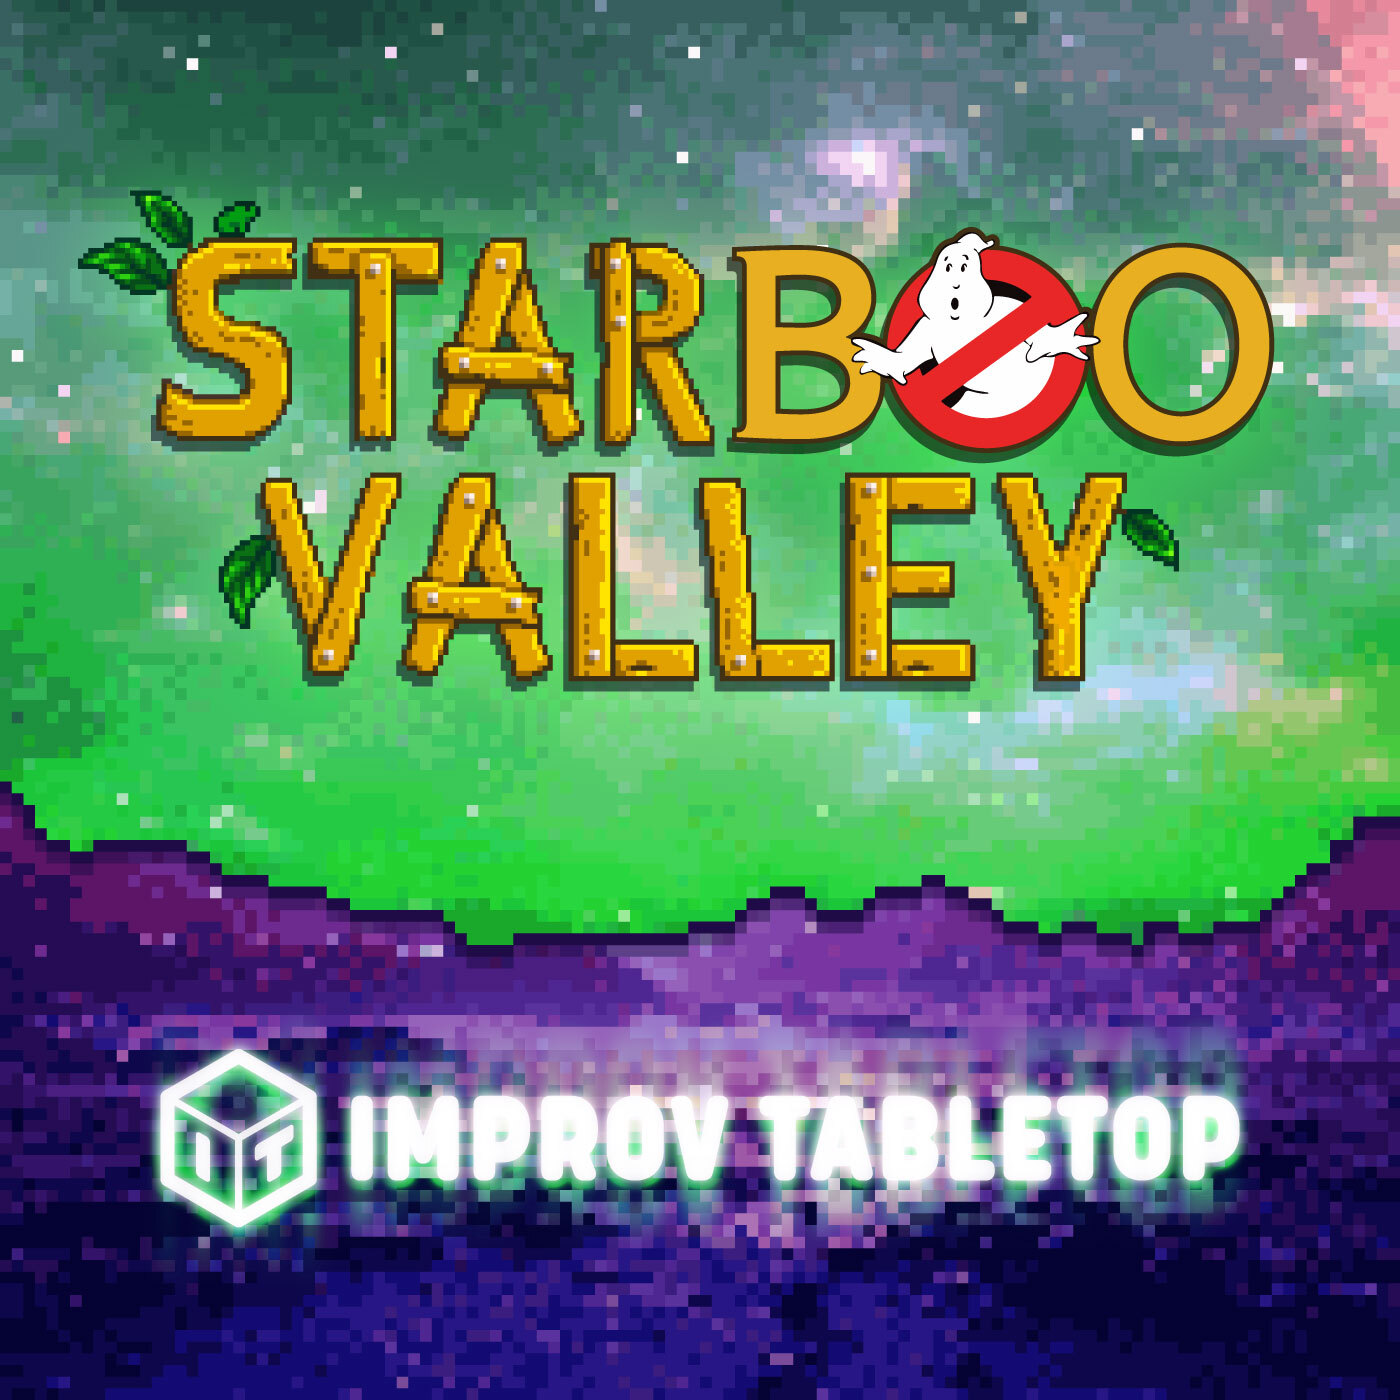 Title reading Starboo Valley above a pixelated haunted valley